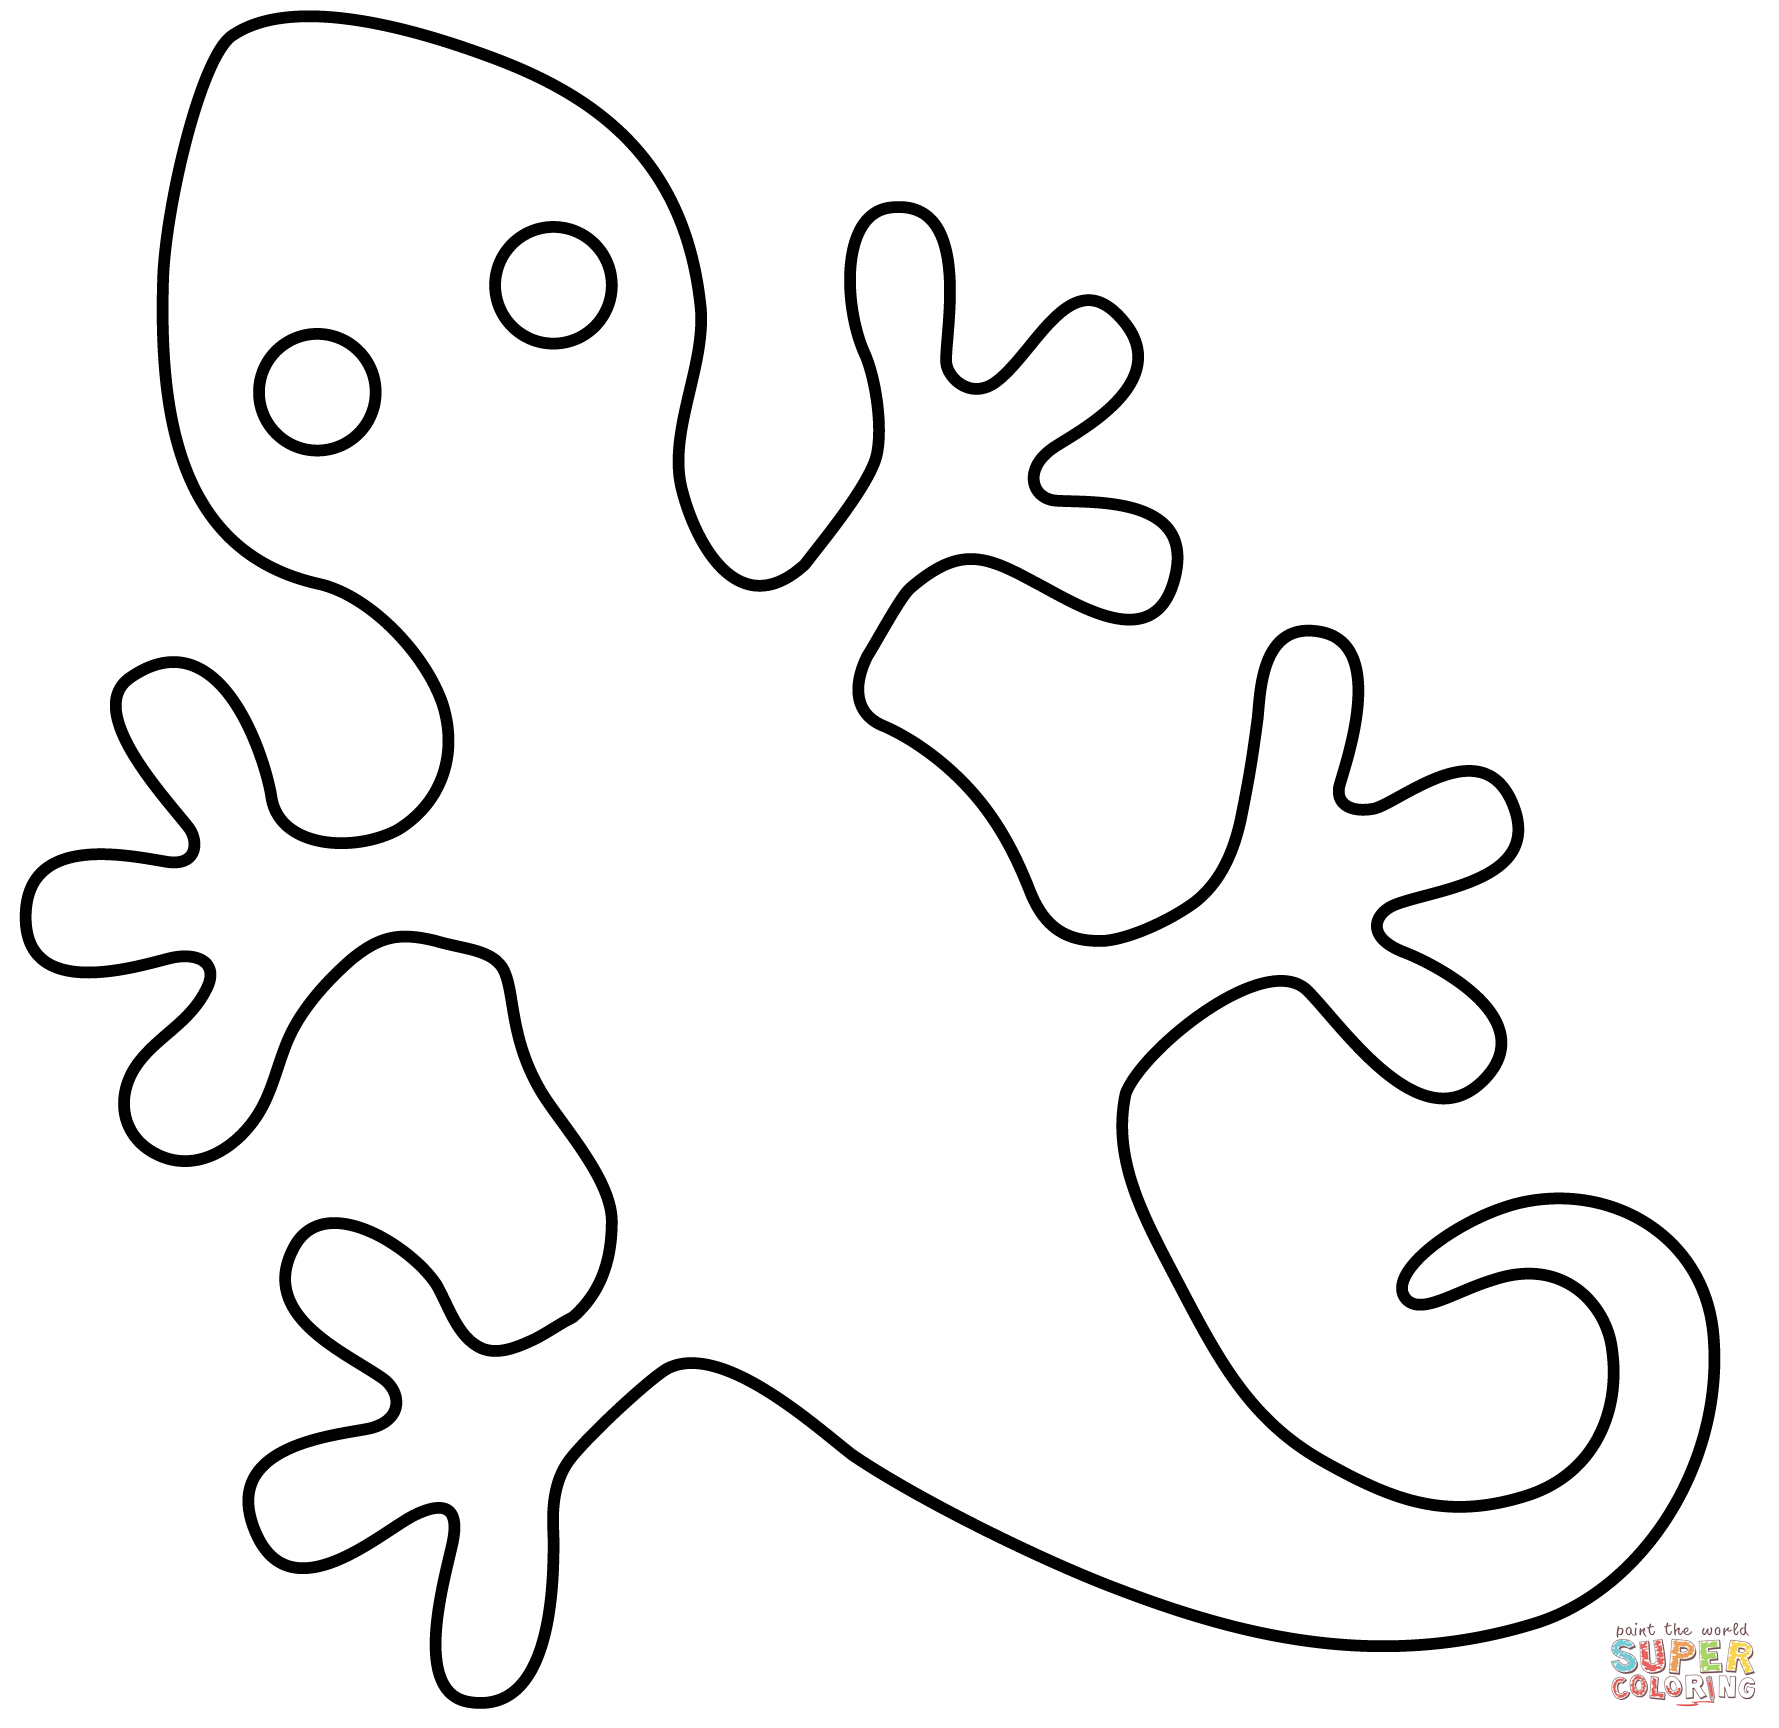 Lizard emoji coloring page free printable coloring pages